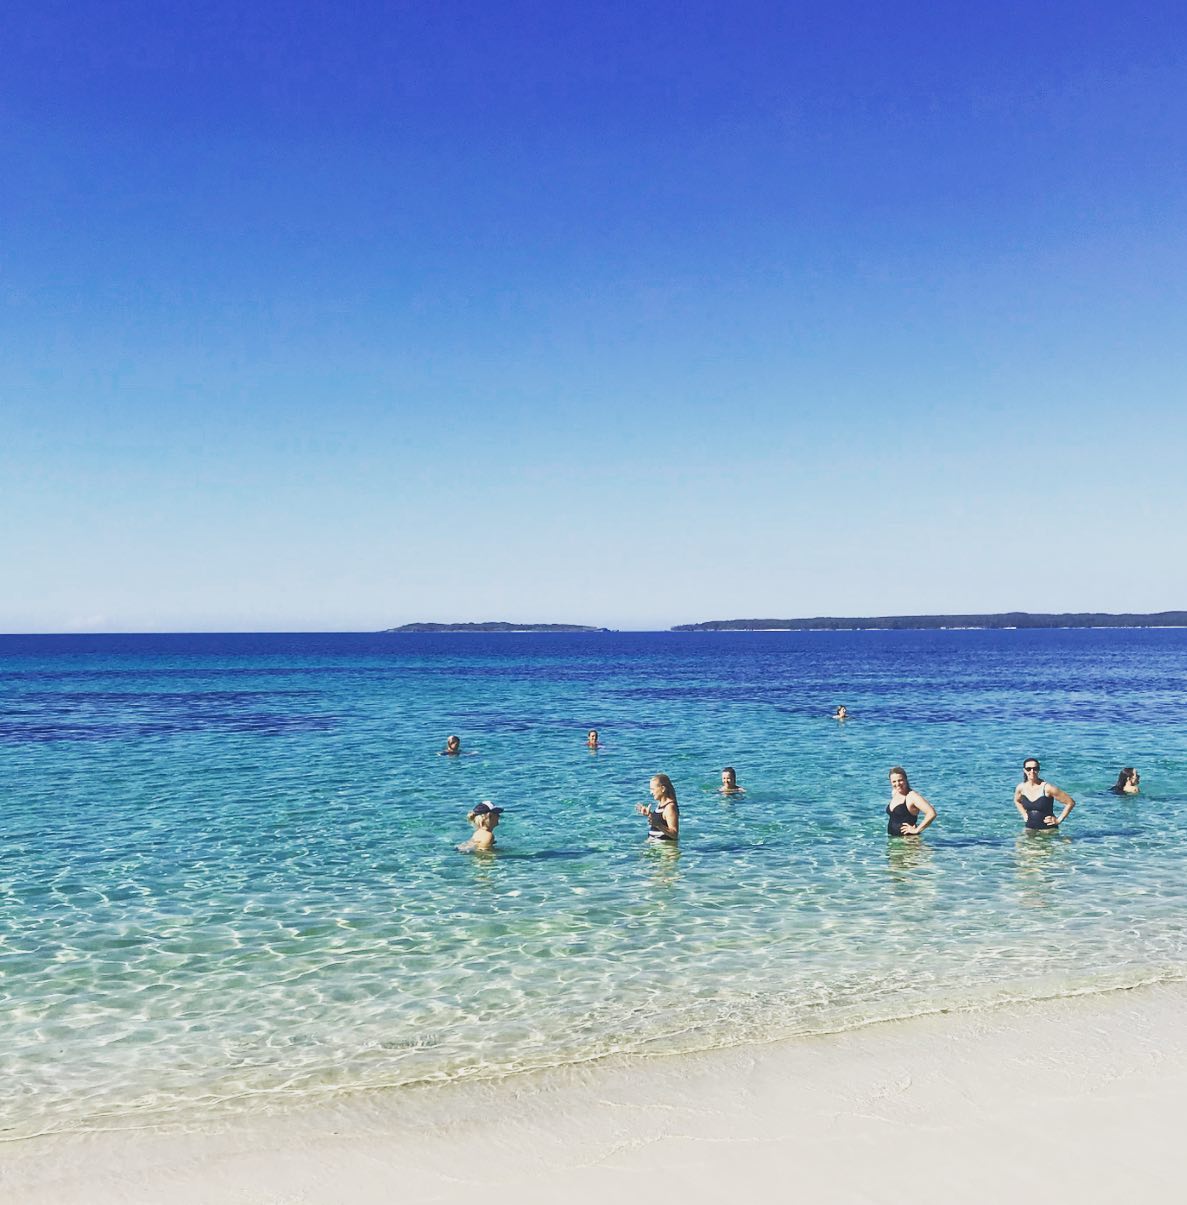 Yesterday was ‘World Bathing Day’, a day to celebrate humanity’s common connection to water through the practice of bathing. This years theme is ‘ Healing Together. Now is the time of reconnection, reuniting and rebirth for our global community.’ We are so grateful to be able to swim, bath and walk this incredible area of Jervis Bay, and acknowledge the Jerrinja and Wandandian people, traditional custodians of this place we love so much. 💚  #worldbathingday